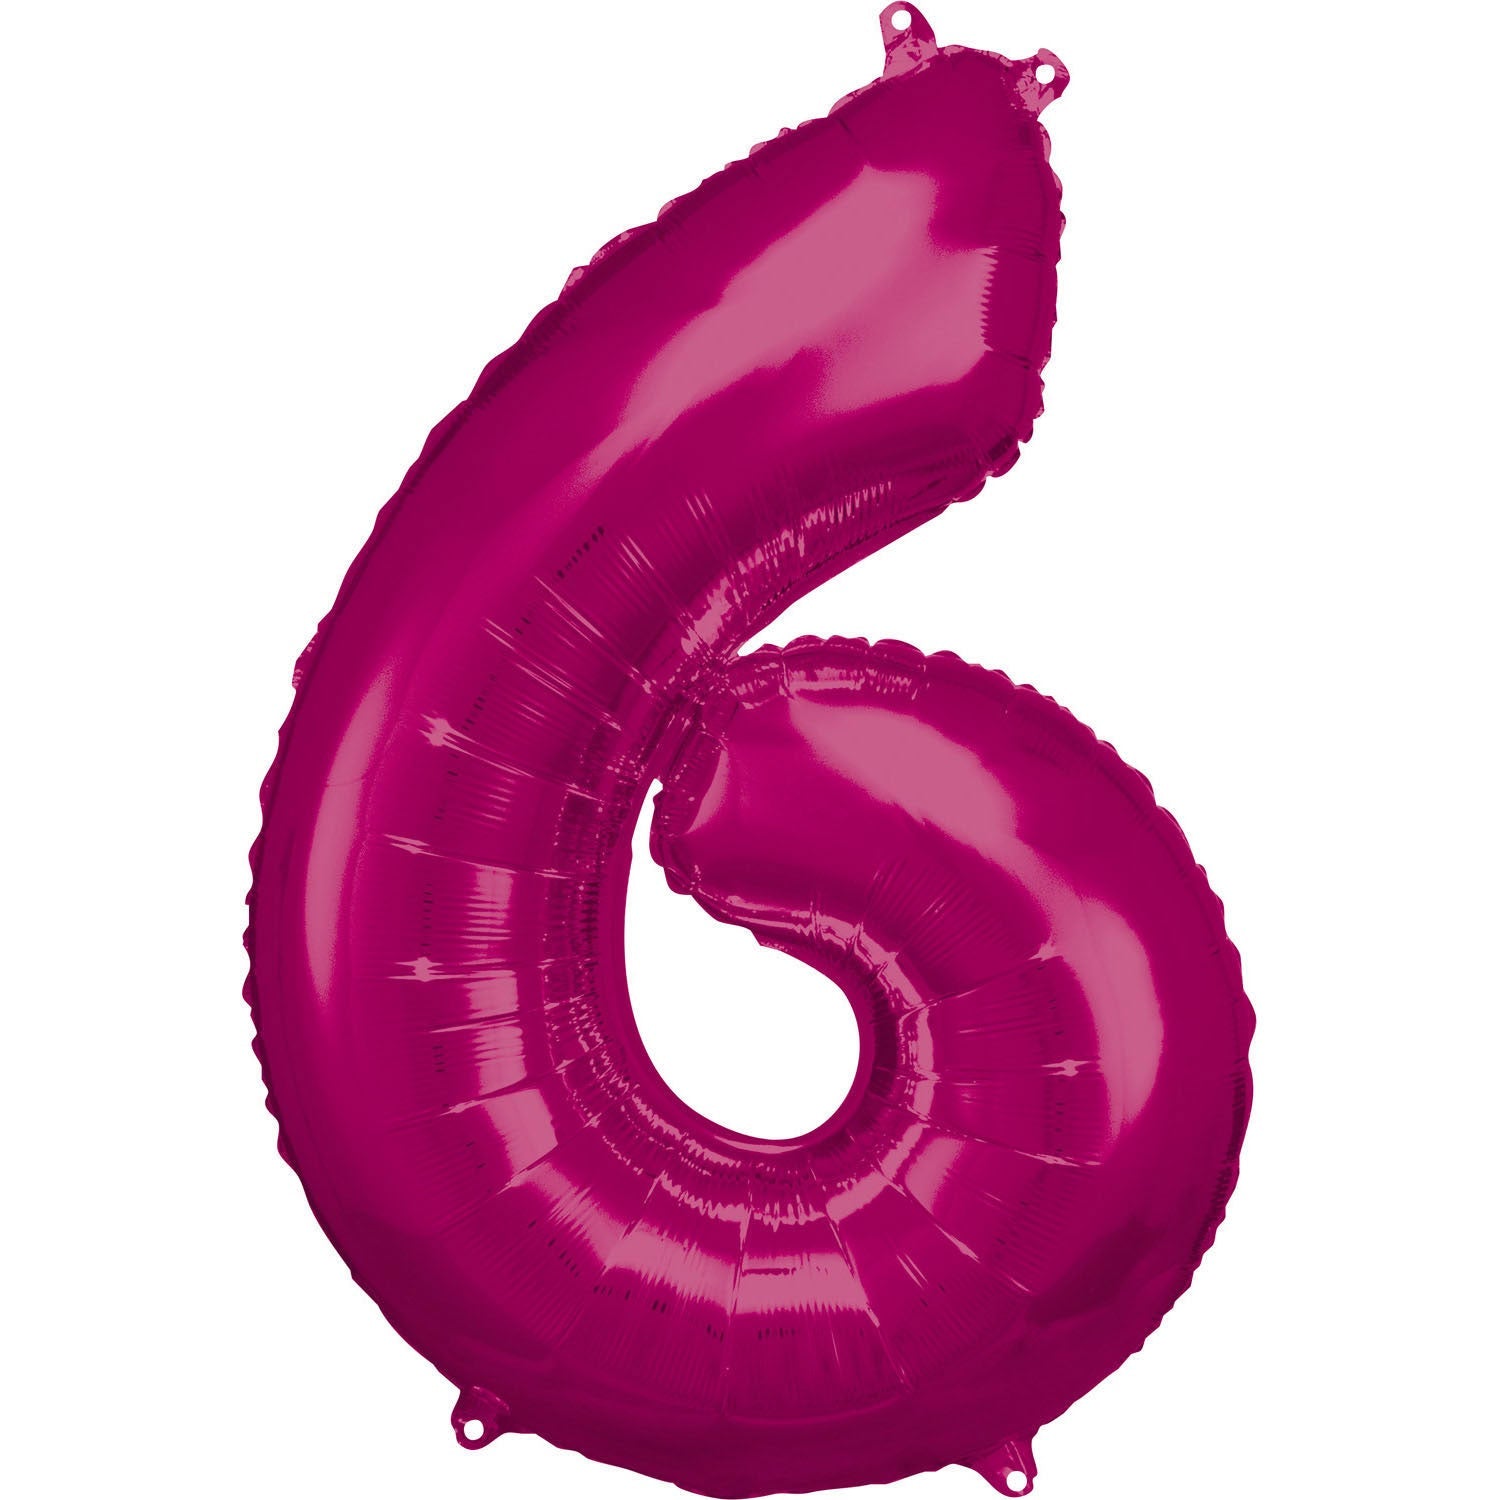 Pink Supershape Number 6 Foil Balloon 88cm (34in) height by 55cm (21in) width Balloon is sold uninflated. Can be inflated with air or helium.